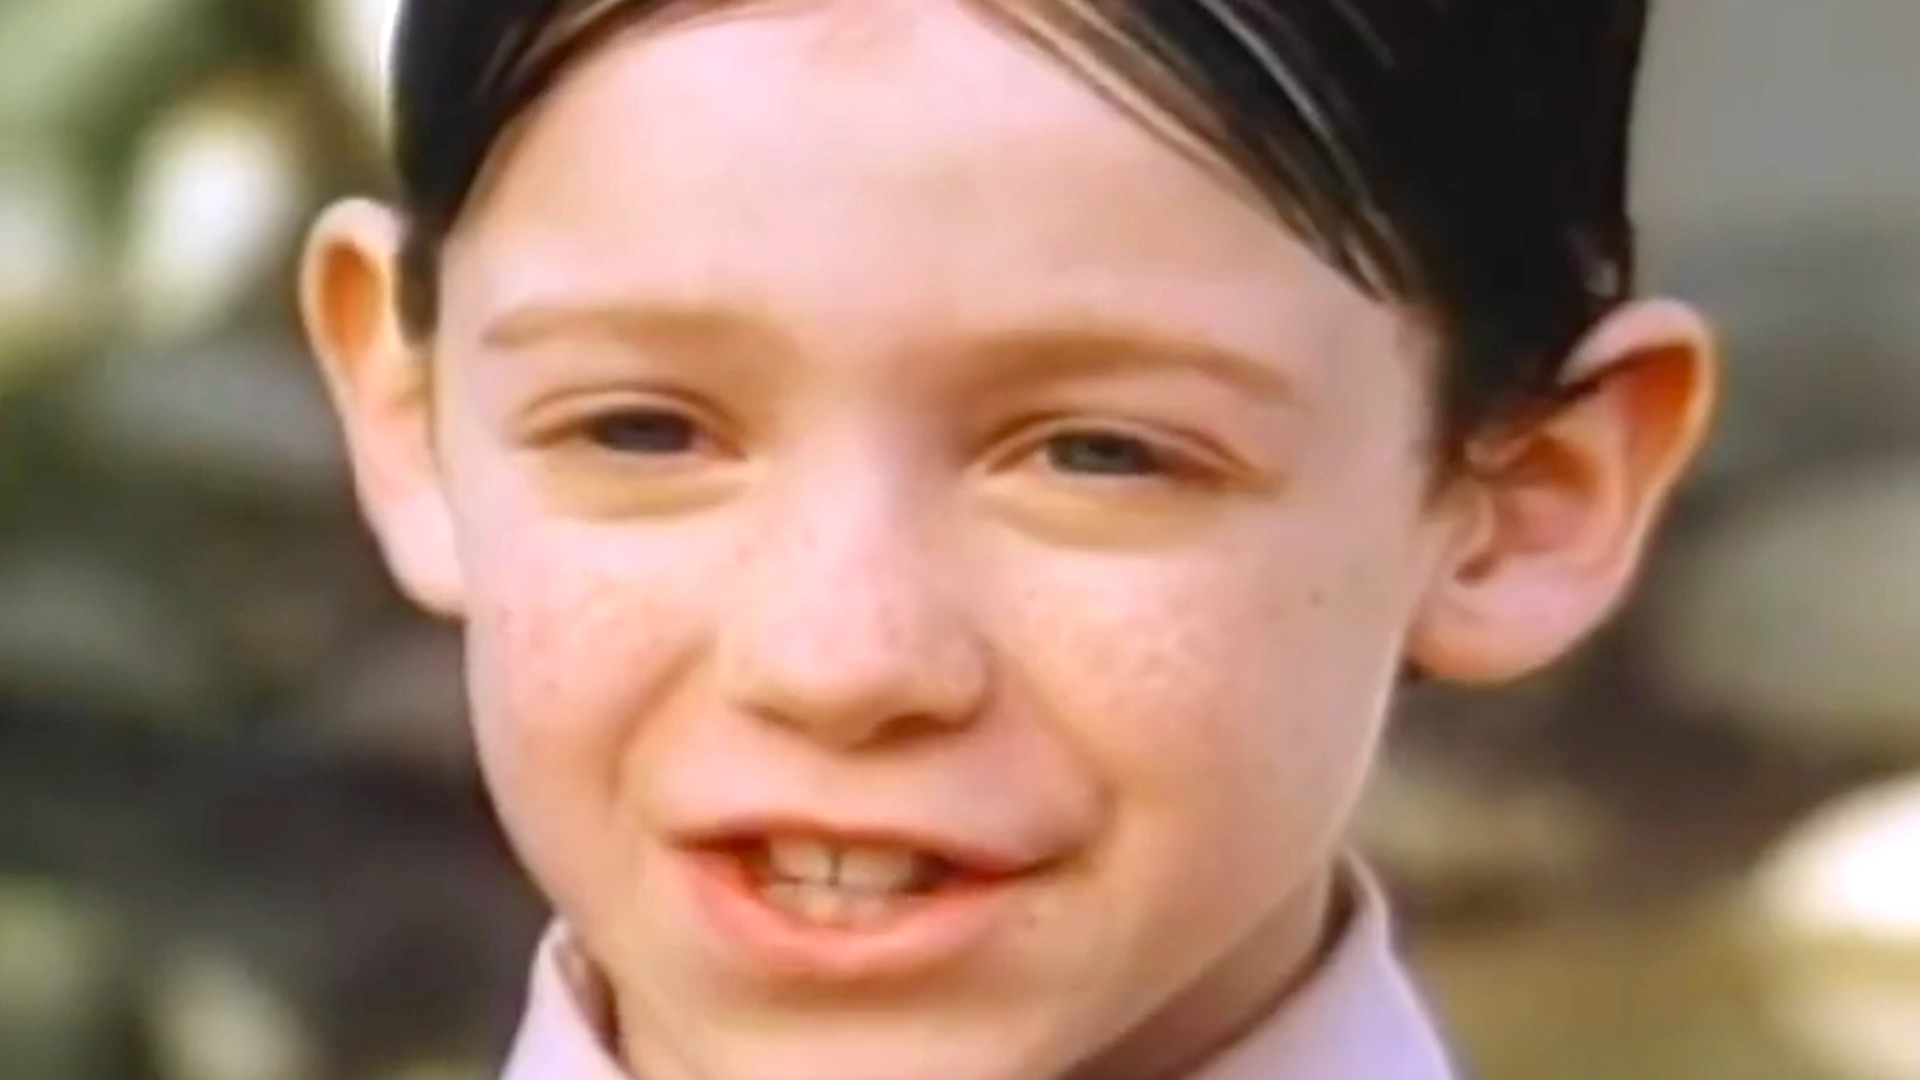 You'll Barely Recognize Spanky From Little Rascals Now